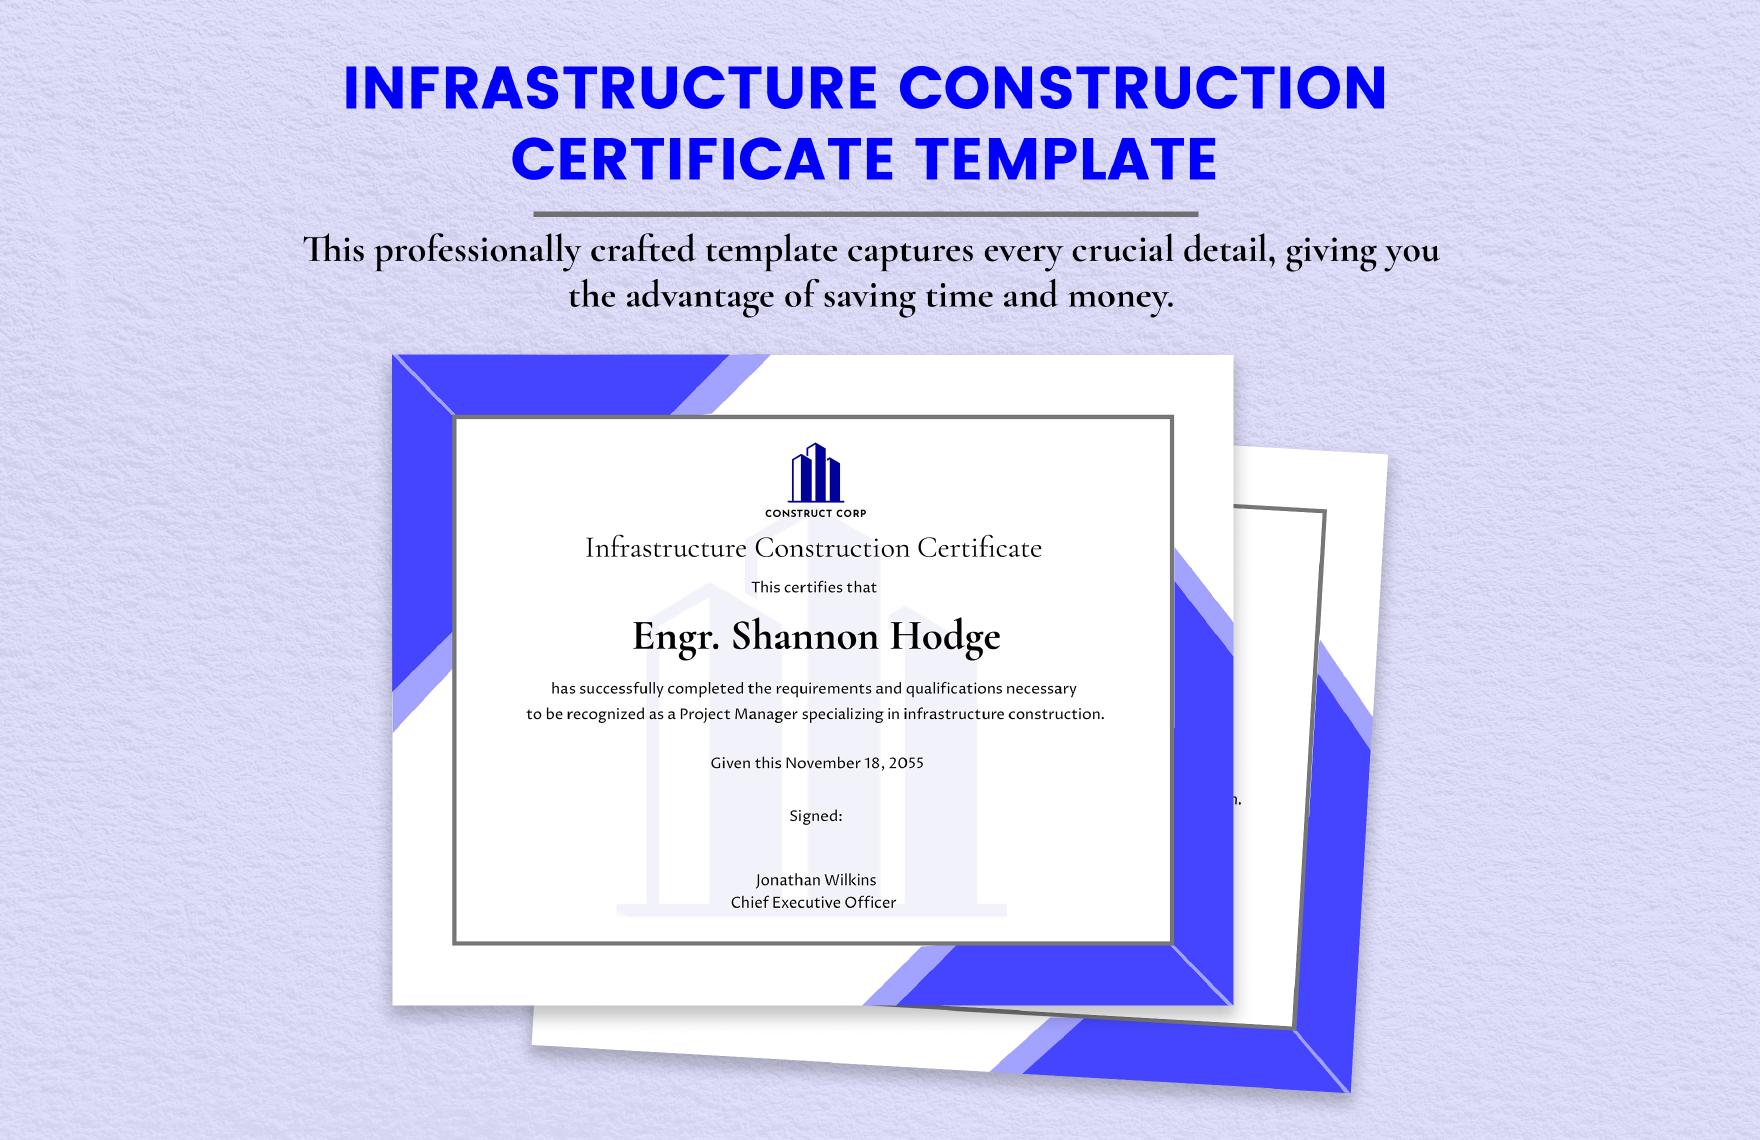 Infrastructure Construction Certificate 